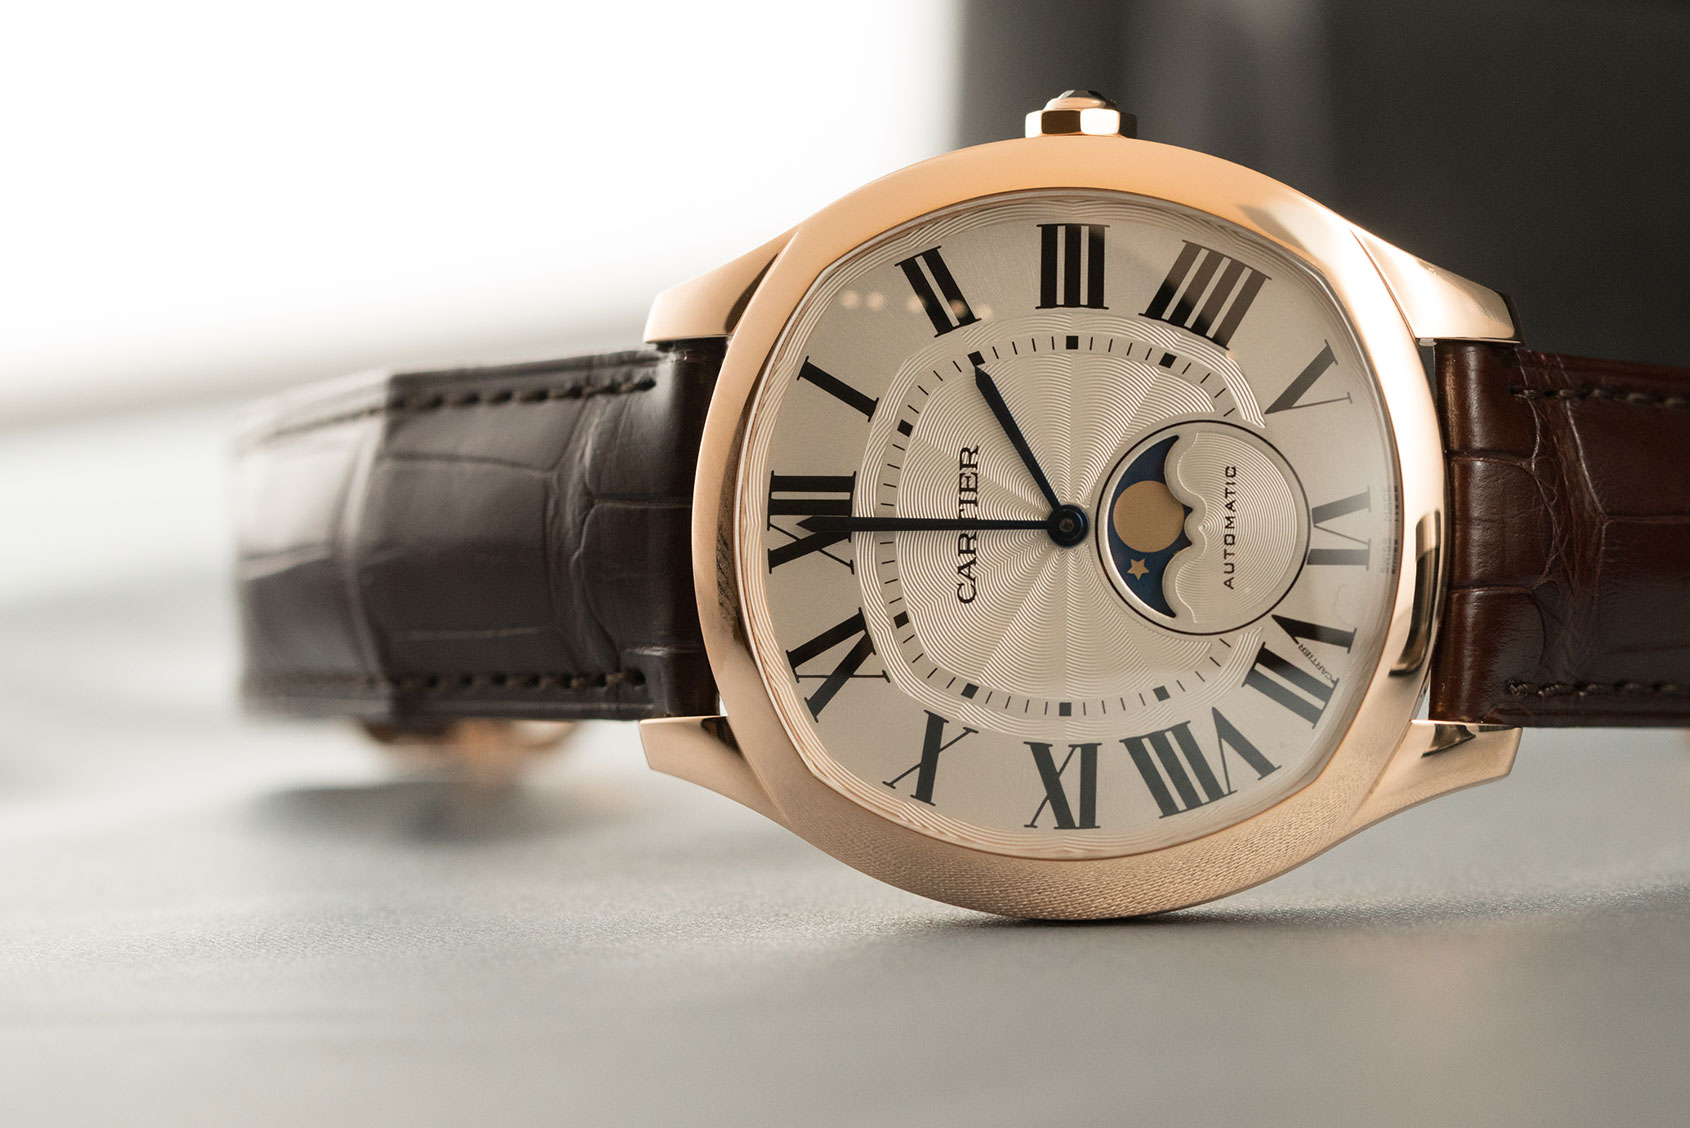 cartier drive moonphase